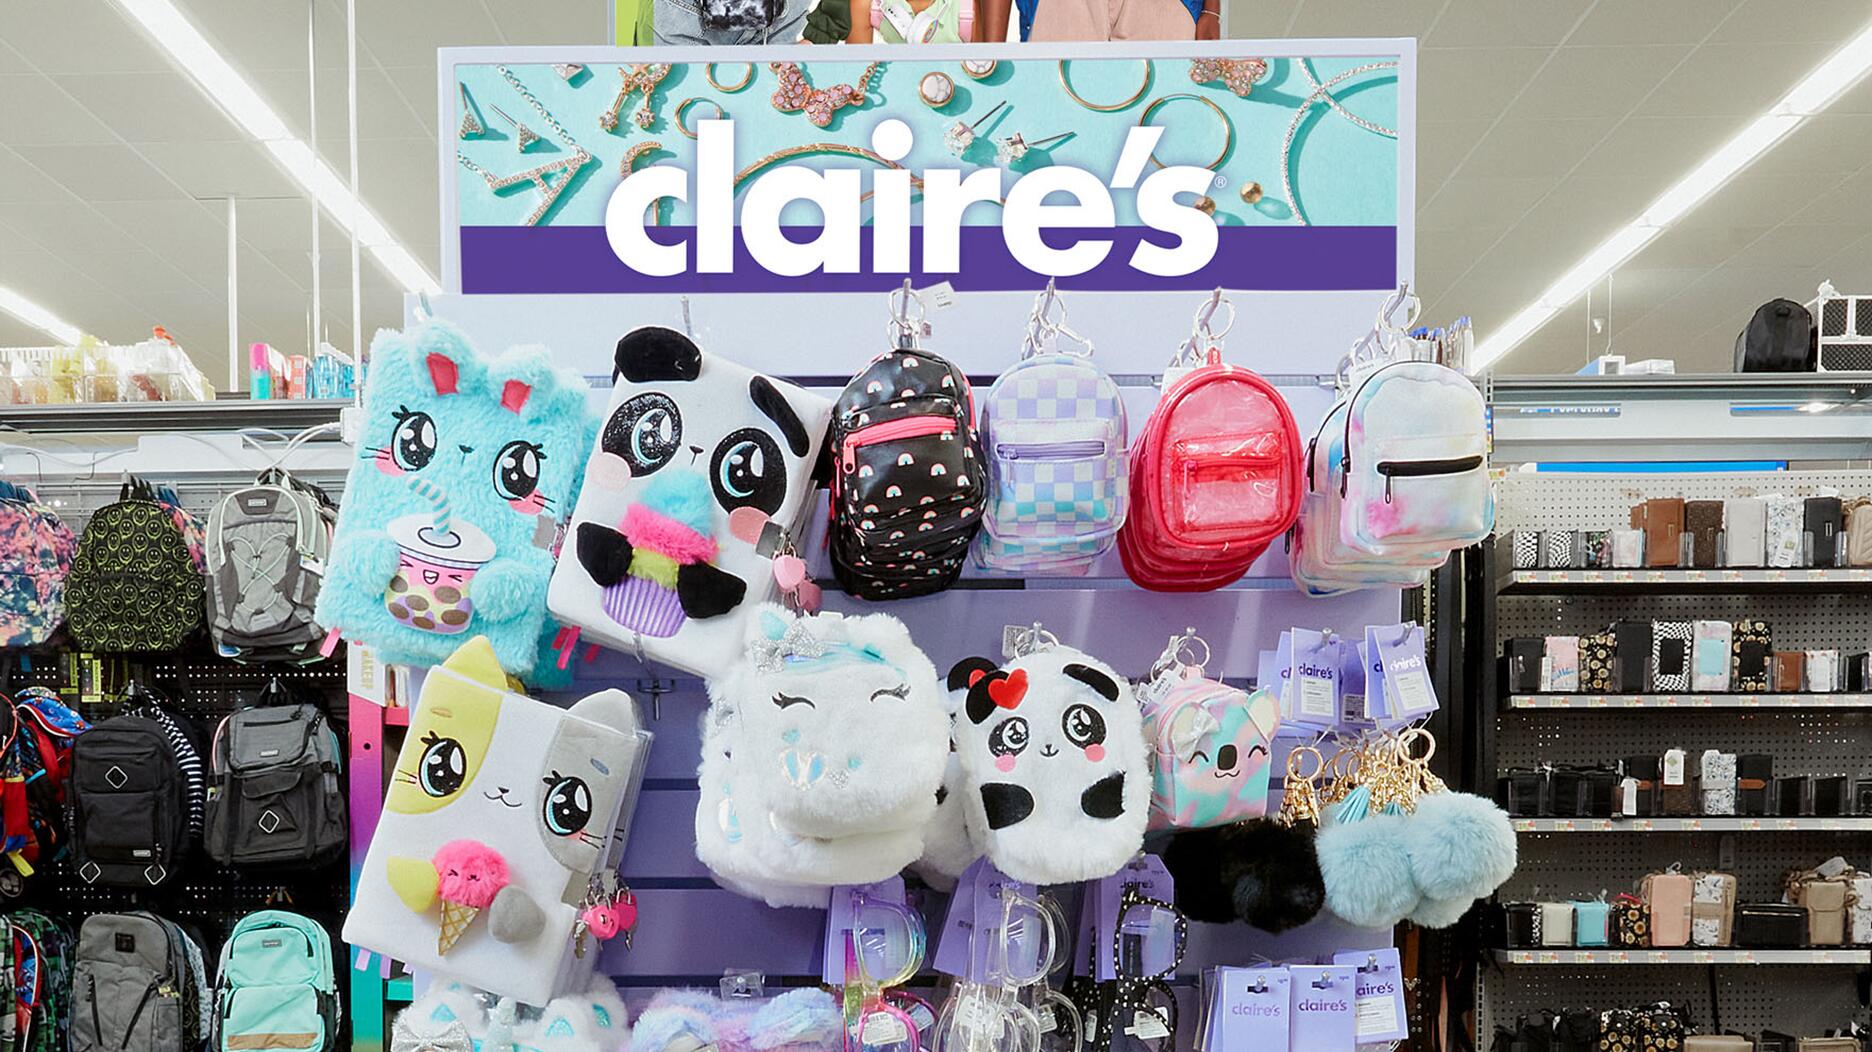 Claire's emerges from bankruptcy